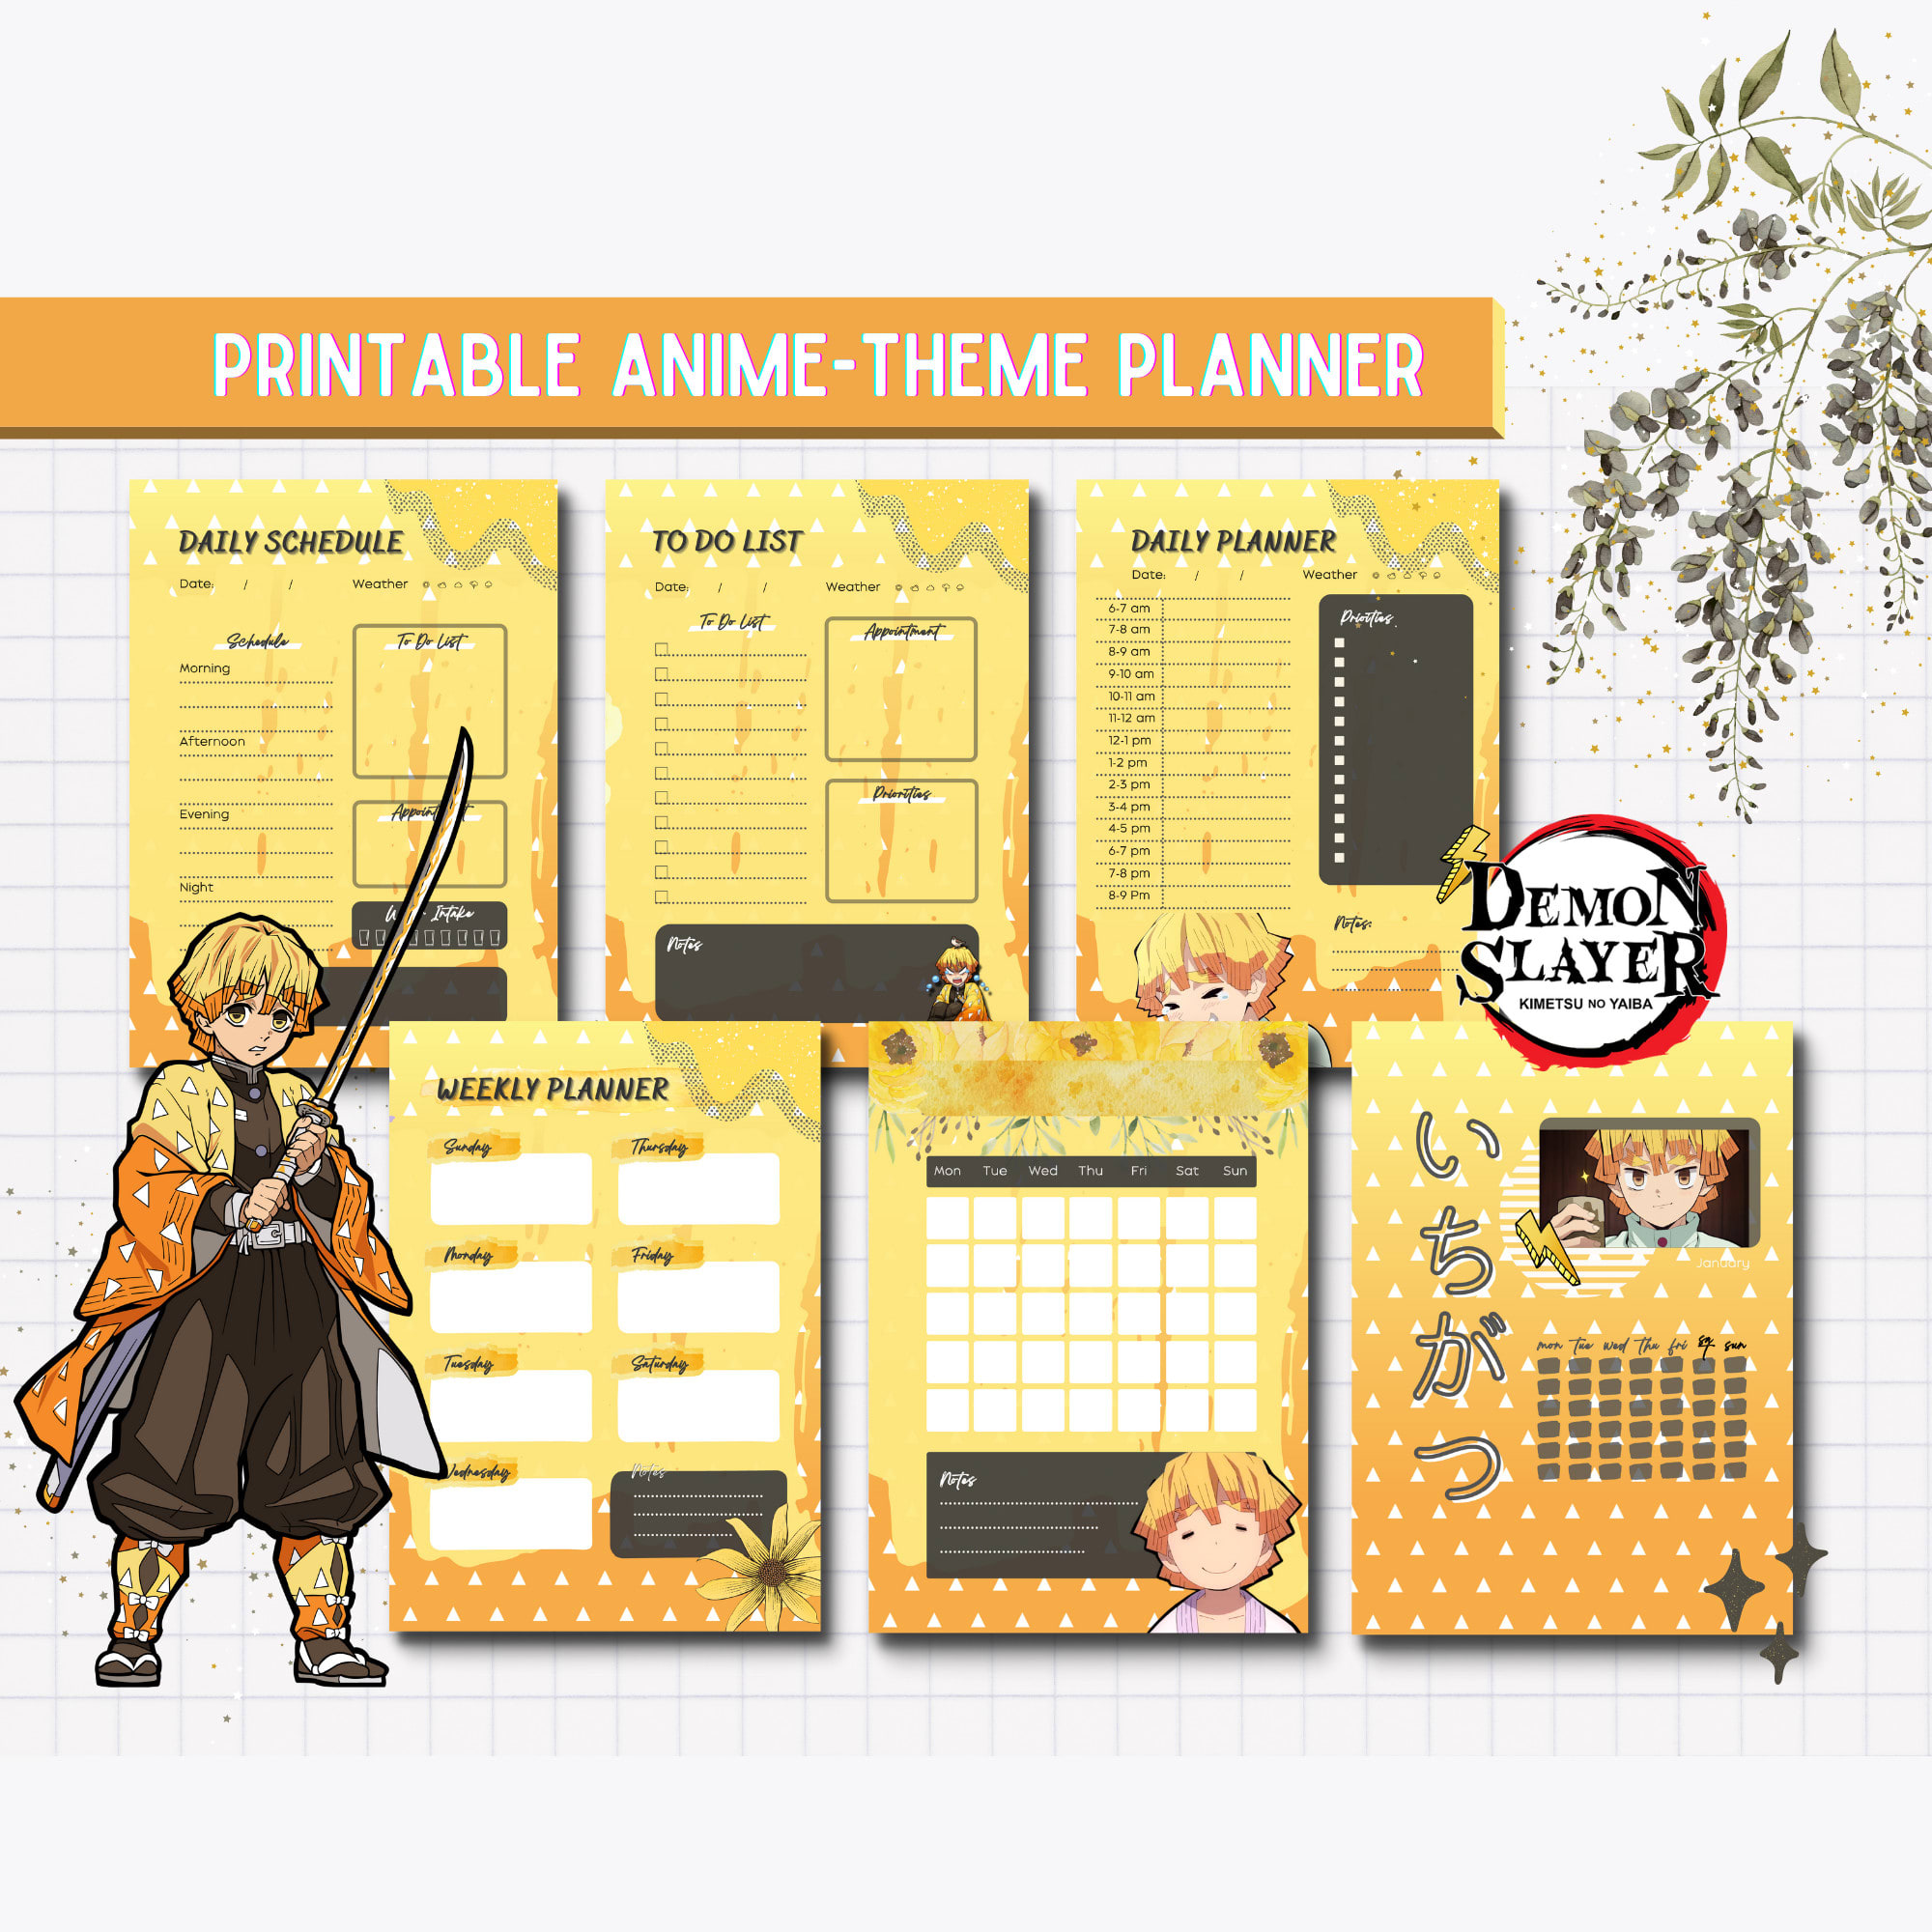 Free and customizable anime templates